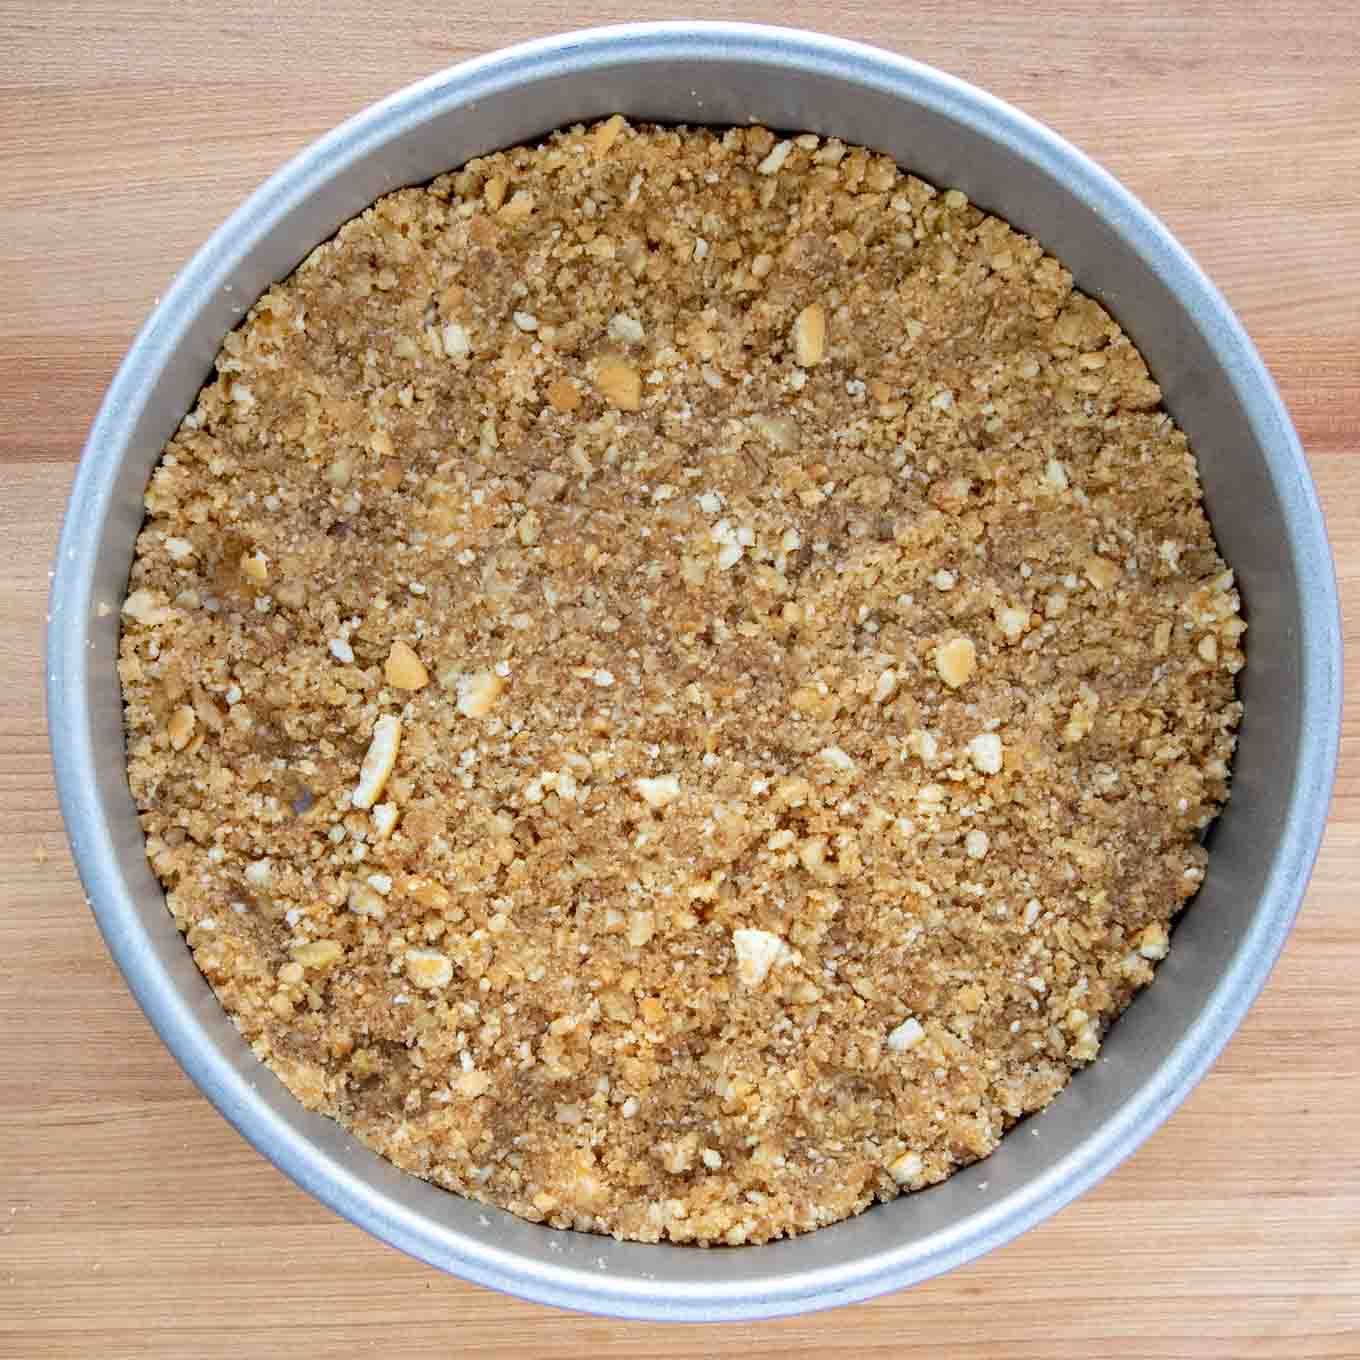 crunch layer in cake pan